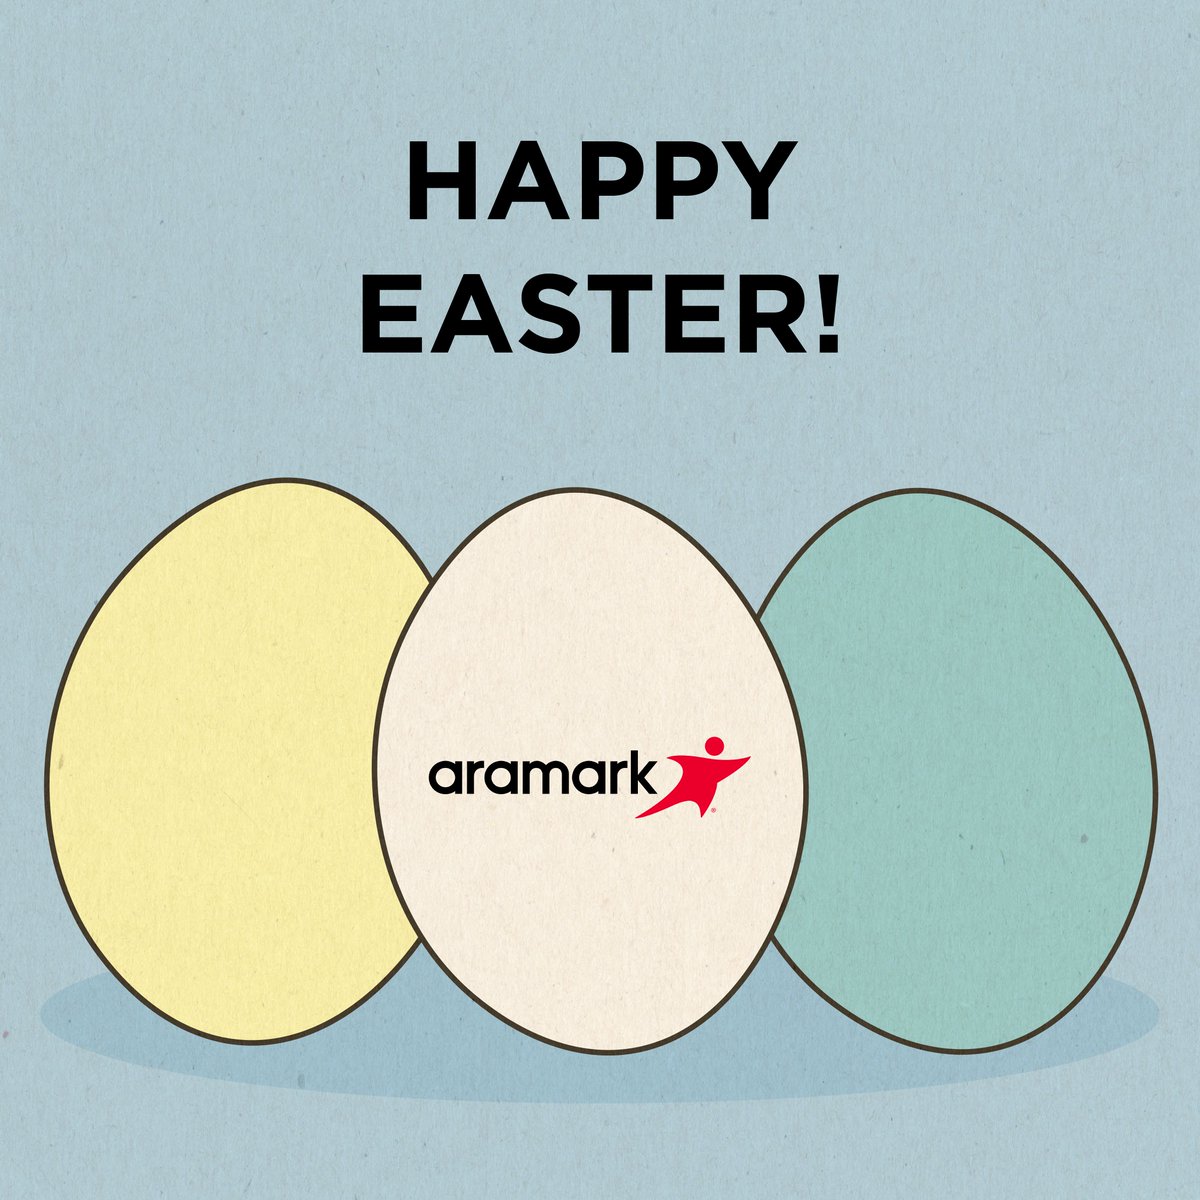 Wishing our clients, guests, and team members that observe Easter a very happy holiday!